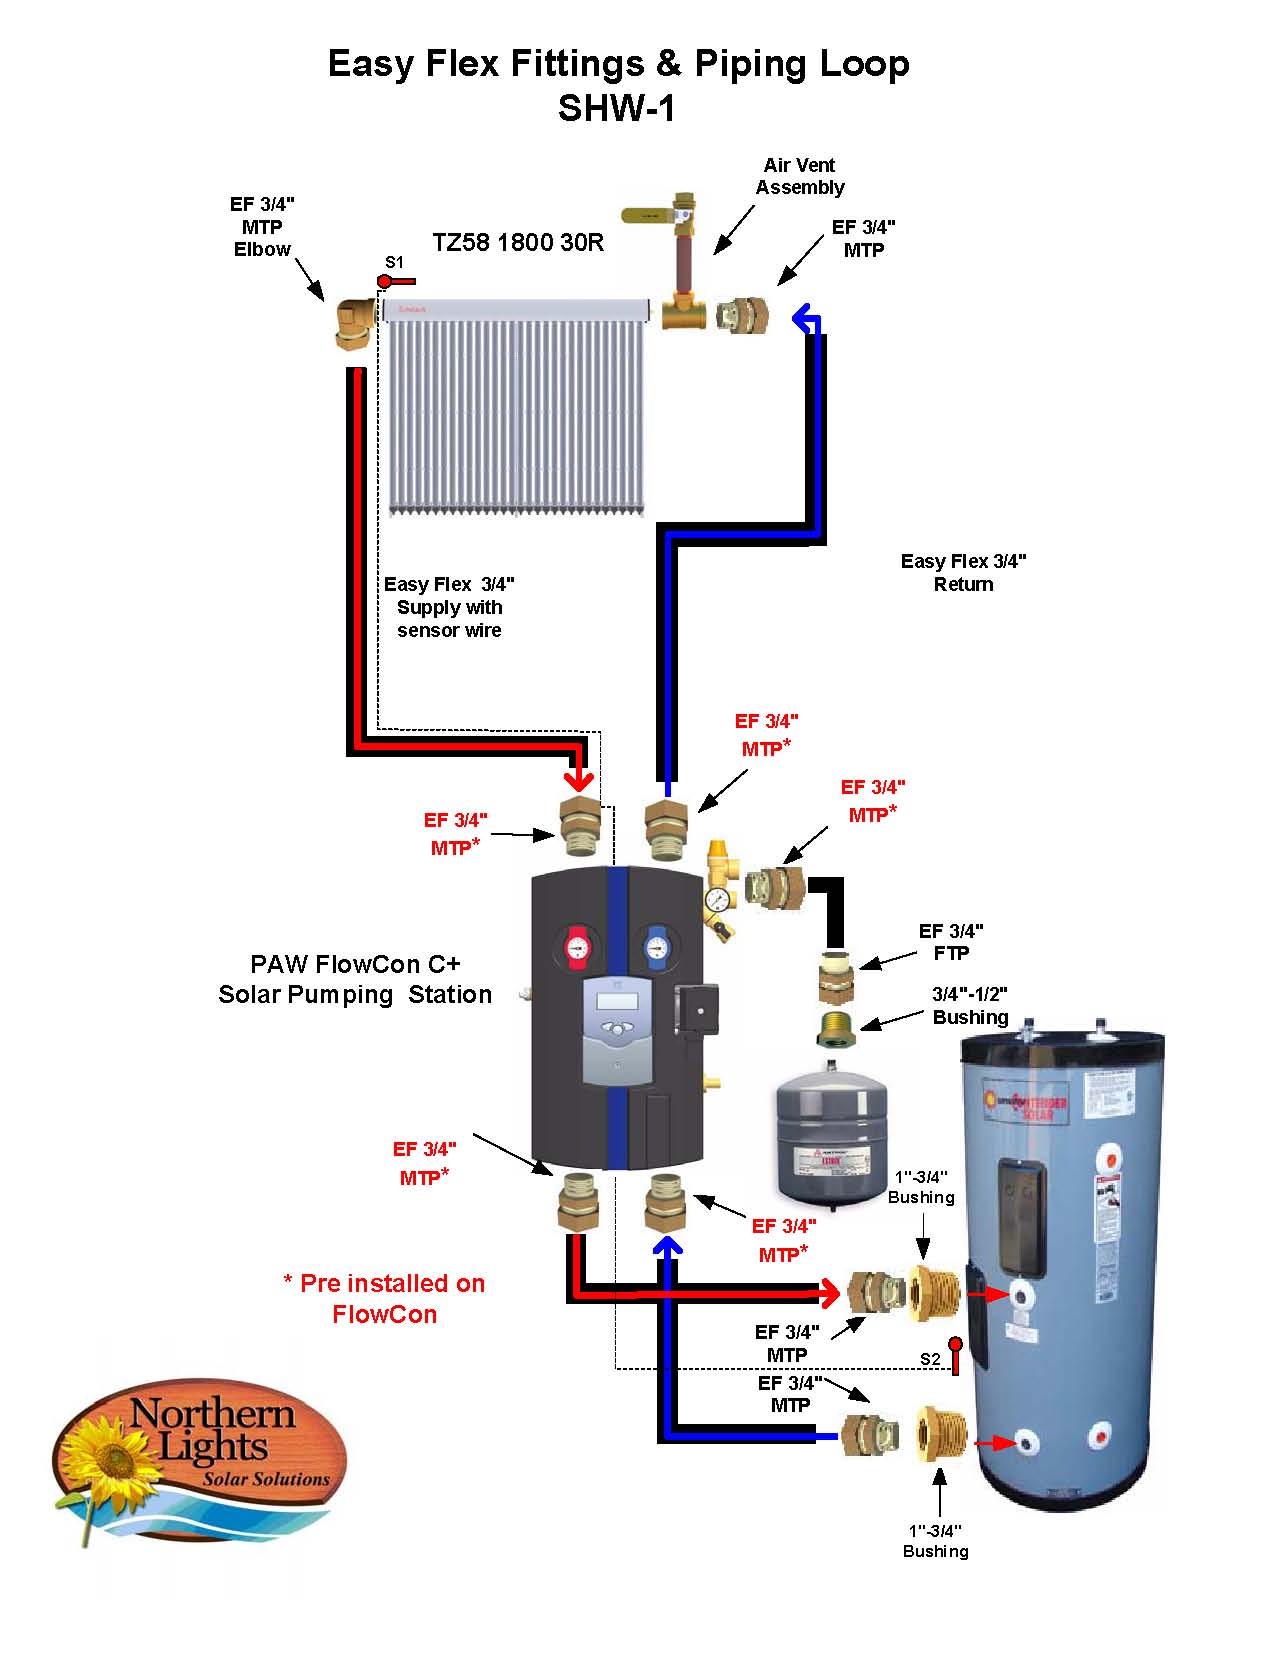 Solar Water Heaters, Solar Water Heating Kits, Heating Systems